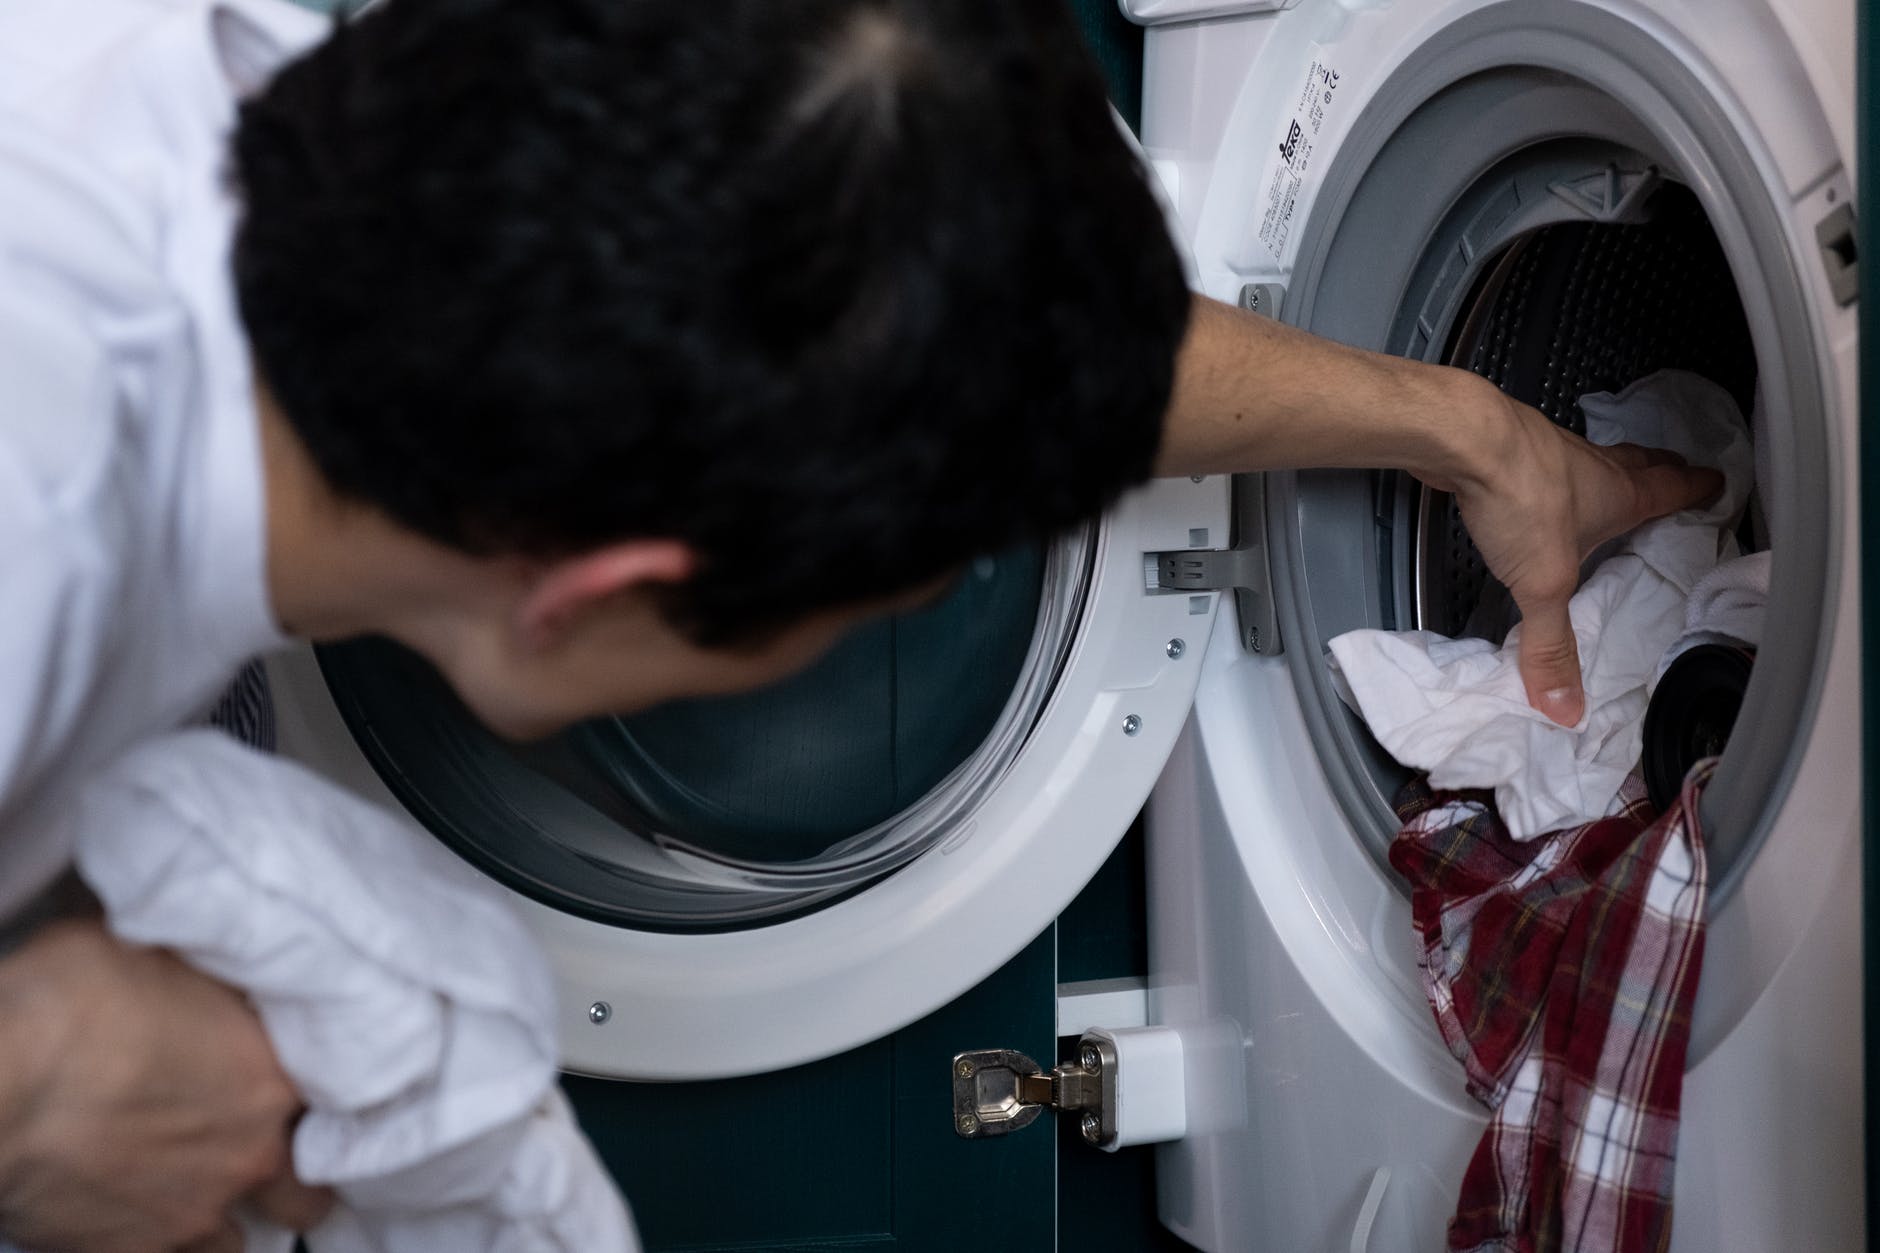 Dryer Not Drying Clothes All the Way? Find the Fix